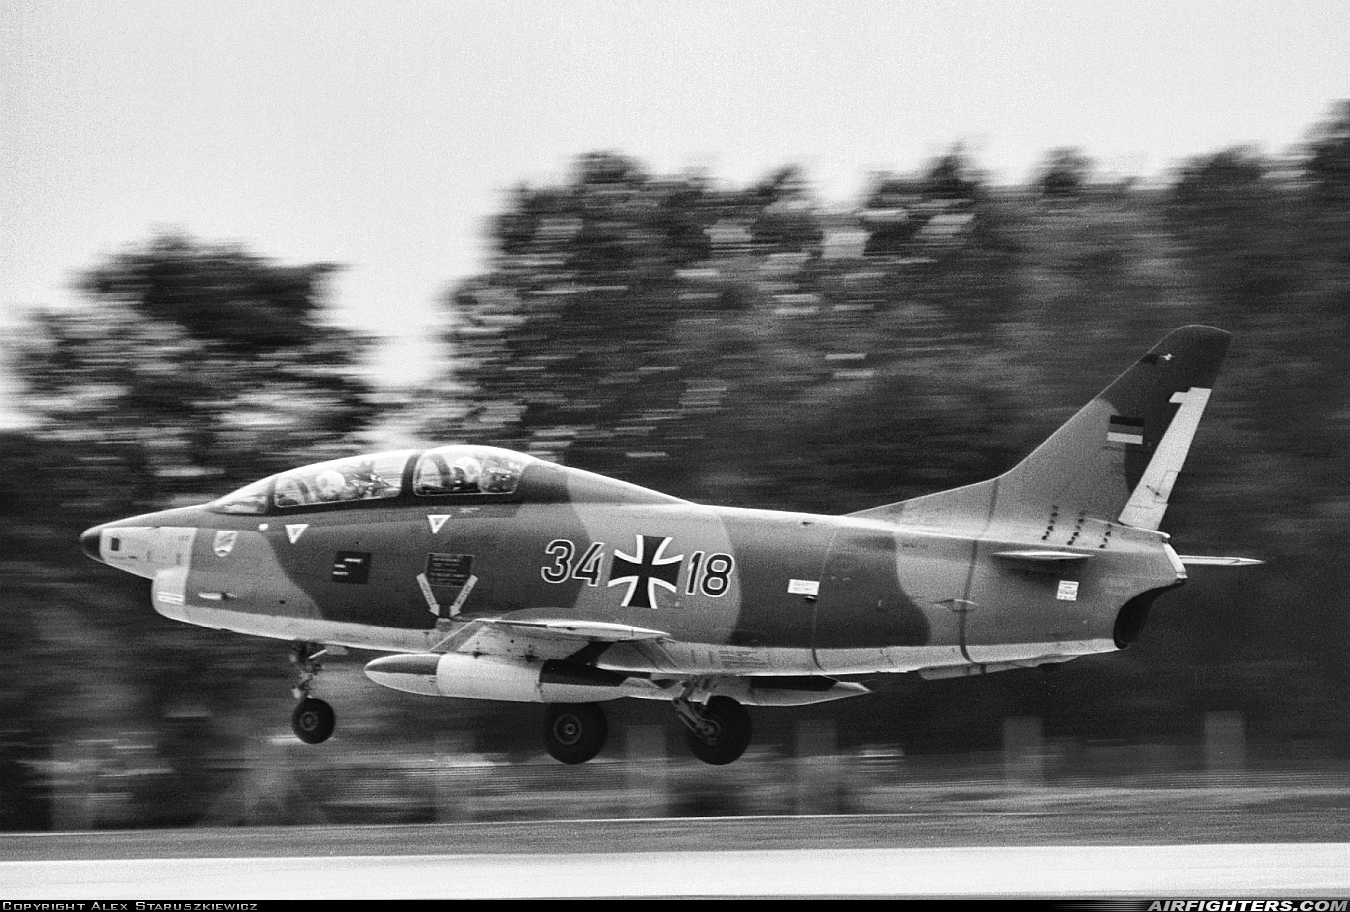 Germany - Air Force Fiat G-91T3 34+18 at Leipheim (LPH/EDSD), Germany